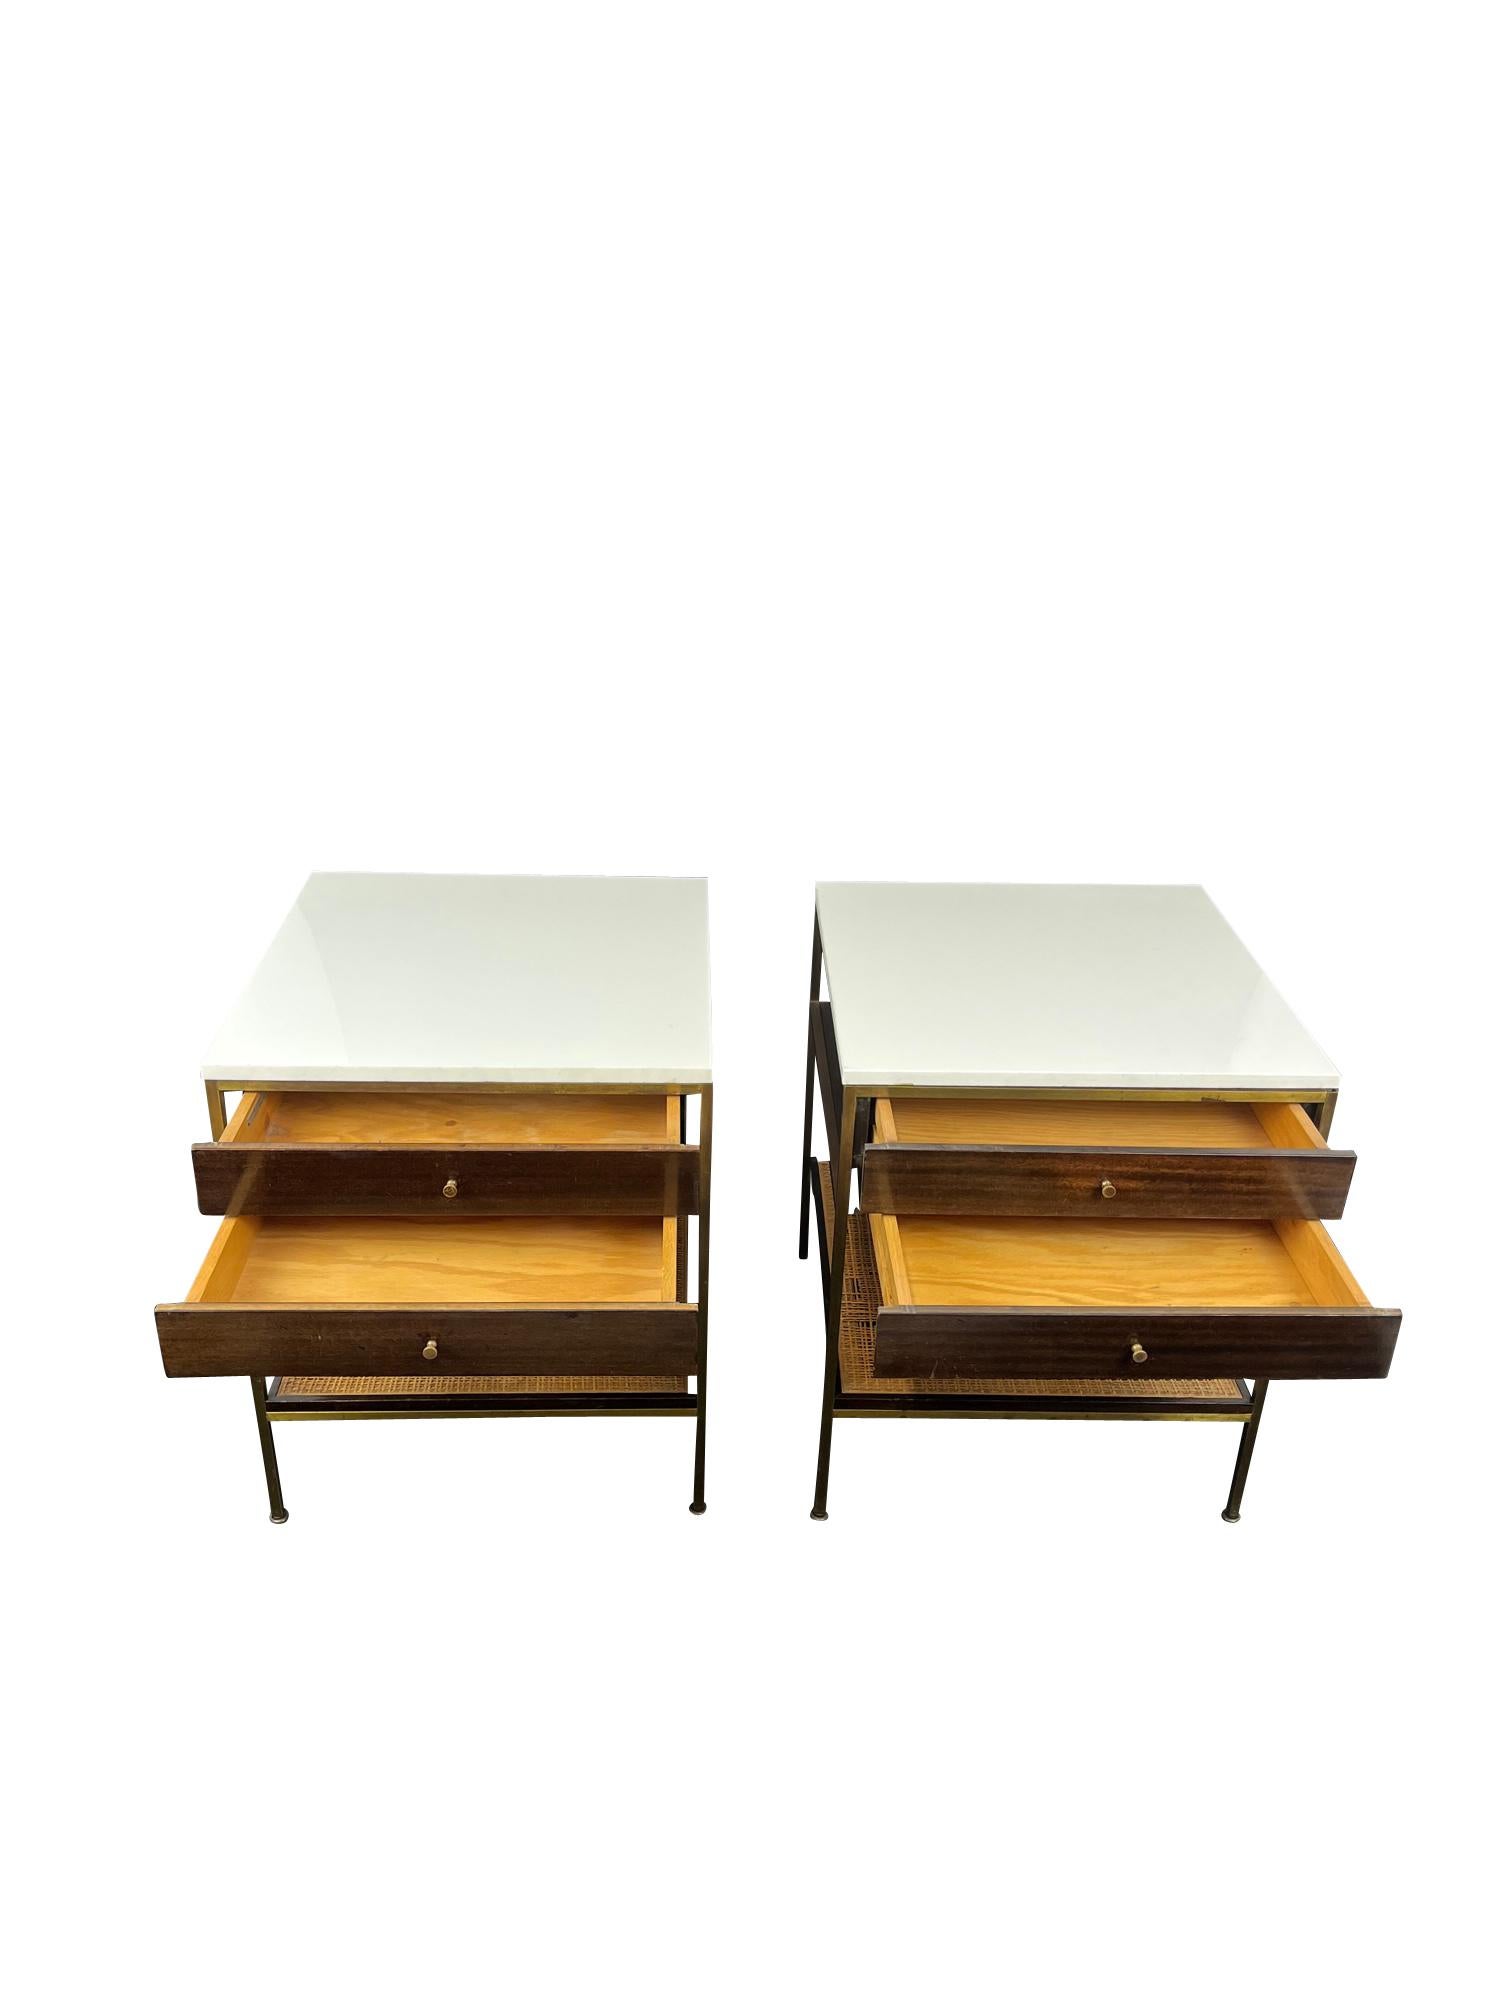 Rare Paul McCobb bedside tables. They are a excuisite combination of elegant materials of Carrara Marble brass, Walnut drawers and Cane shelves.
